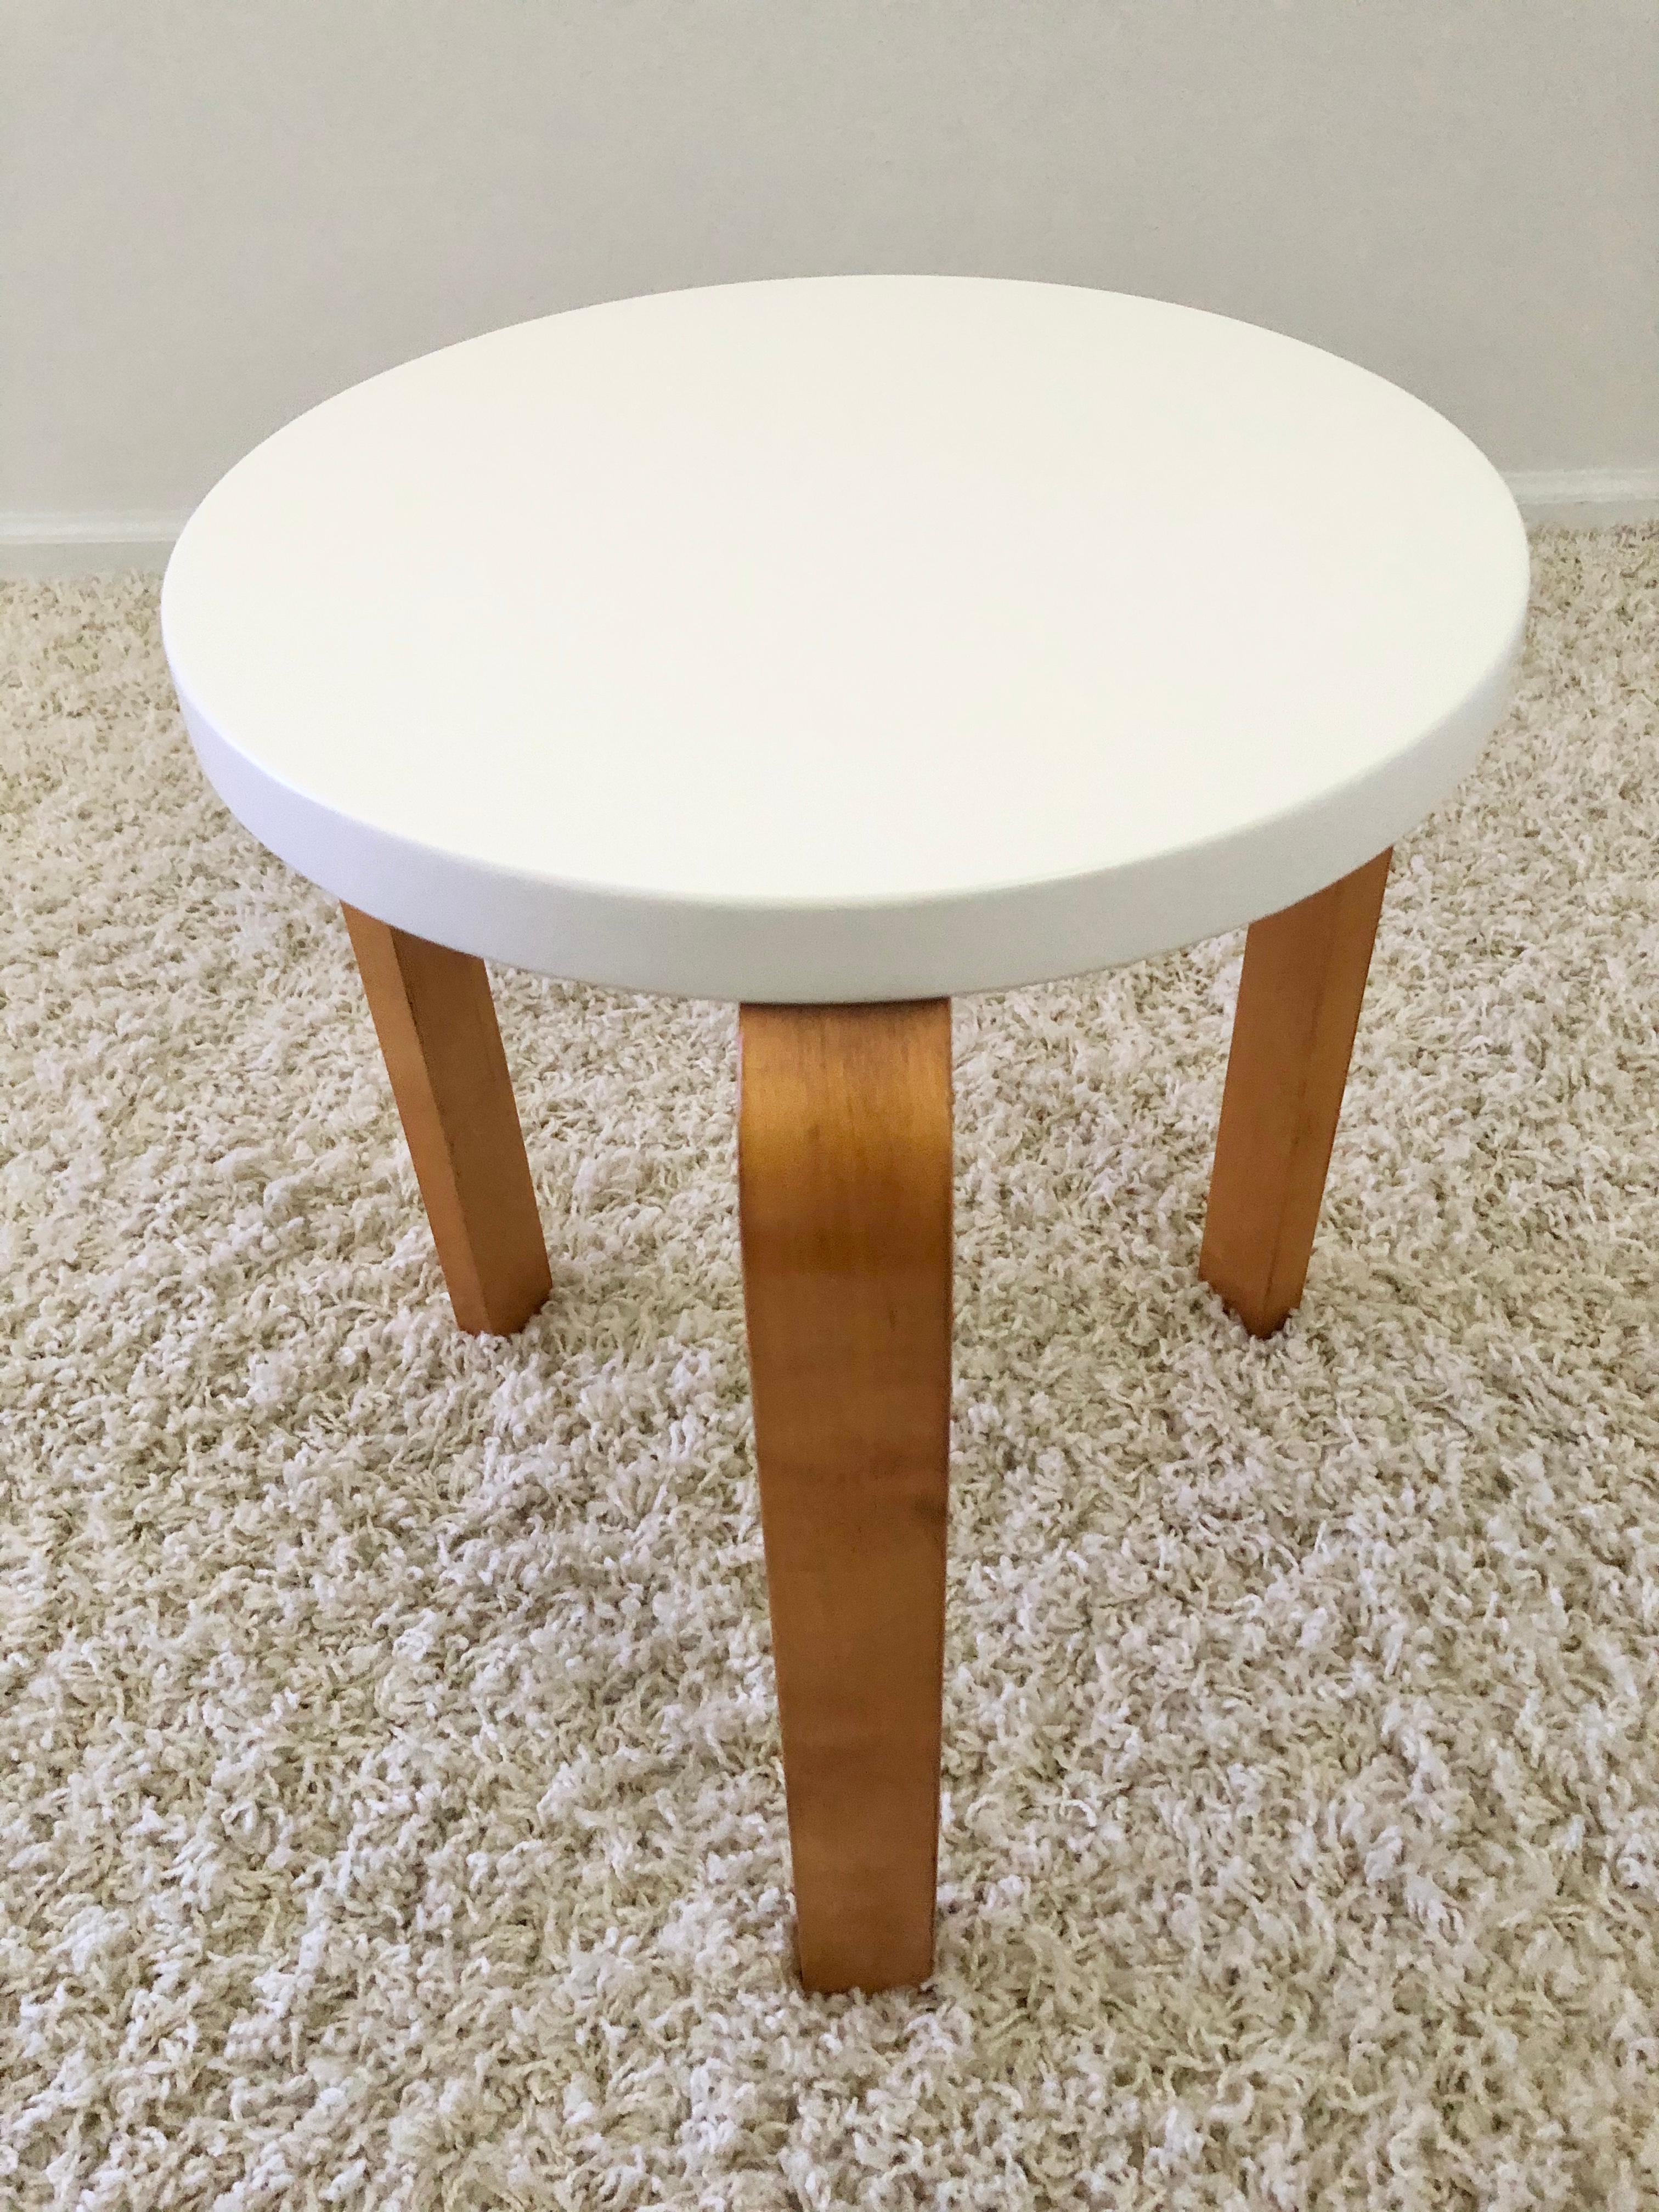 Hand-Crafted Alvar Aalto Early Finsven Stamped Stool / Small Table Lacquer Top